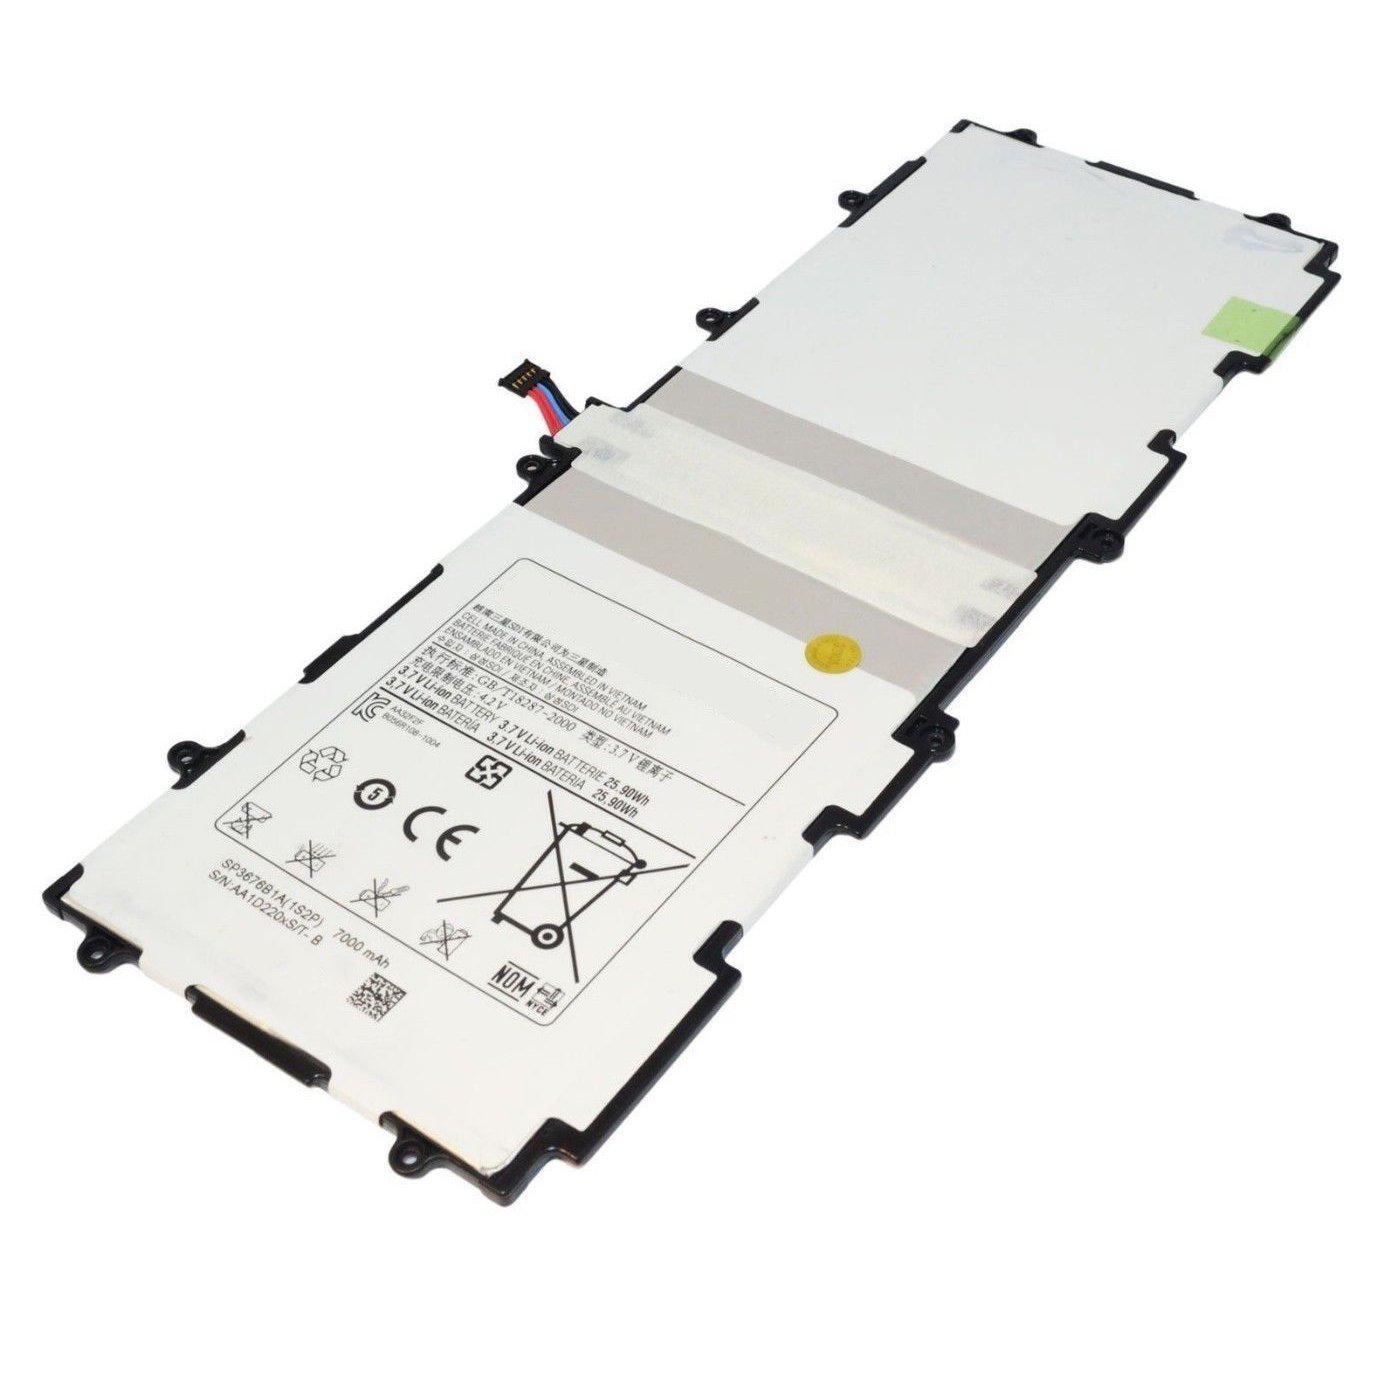 Samsung Galaxy Tab 2 10.1" - Replacement Battery for [product_price] - First Help Tech